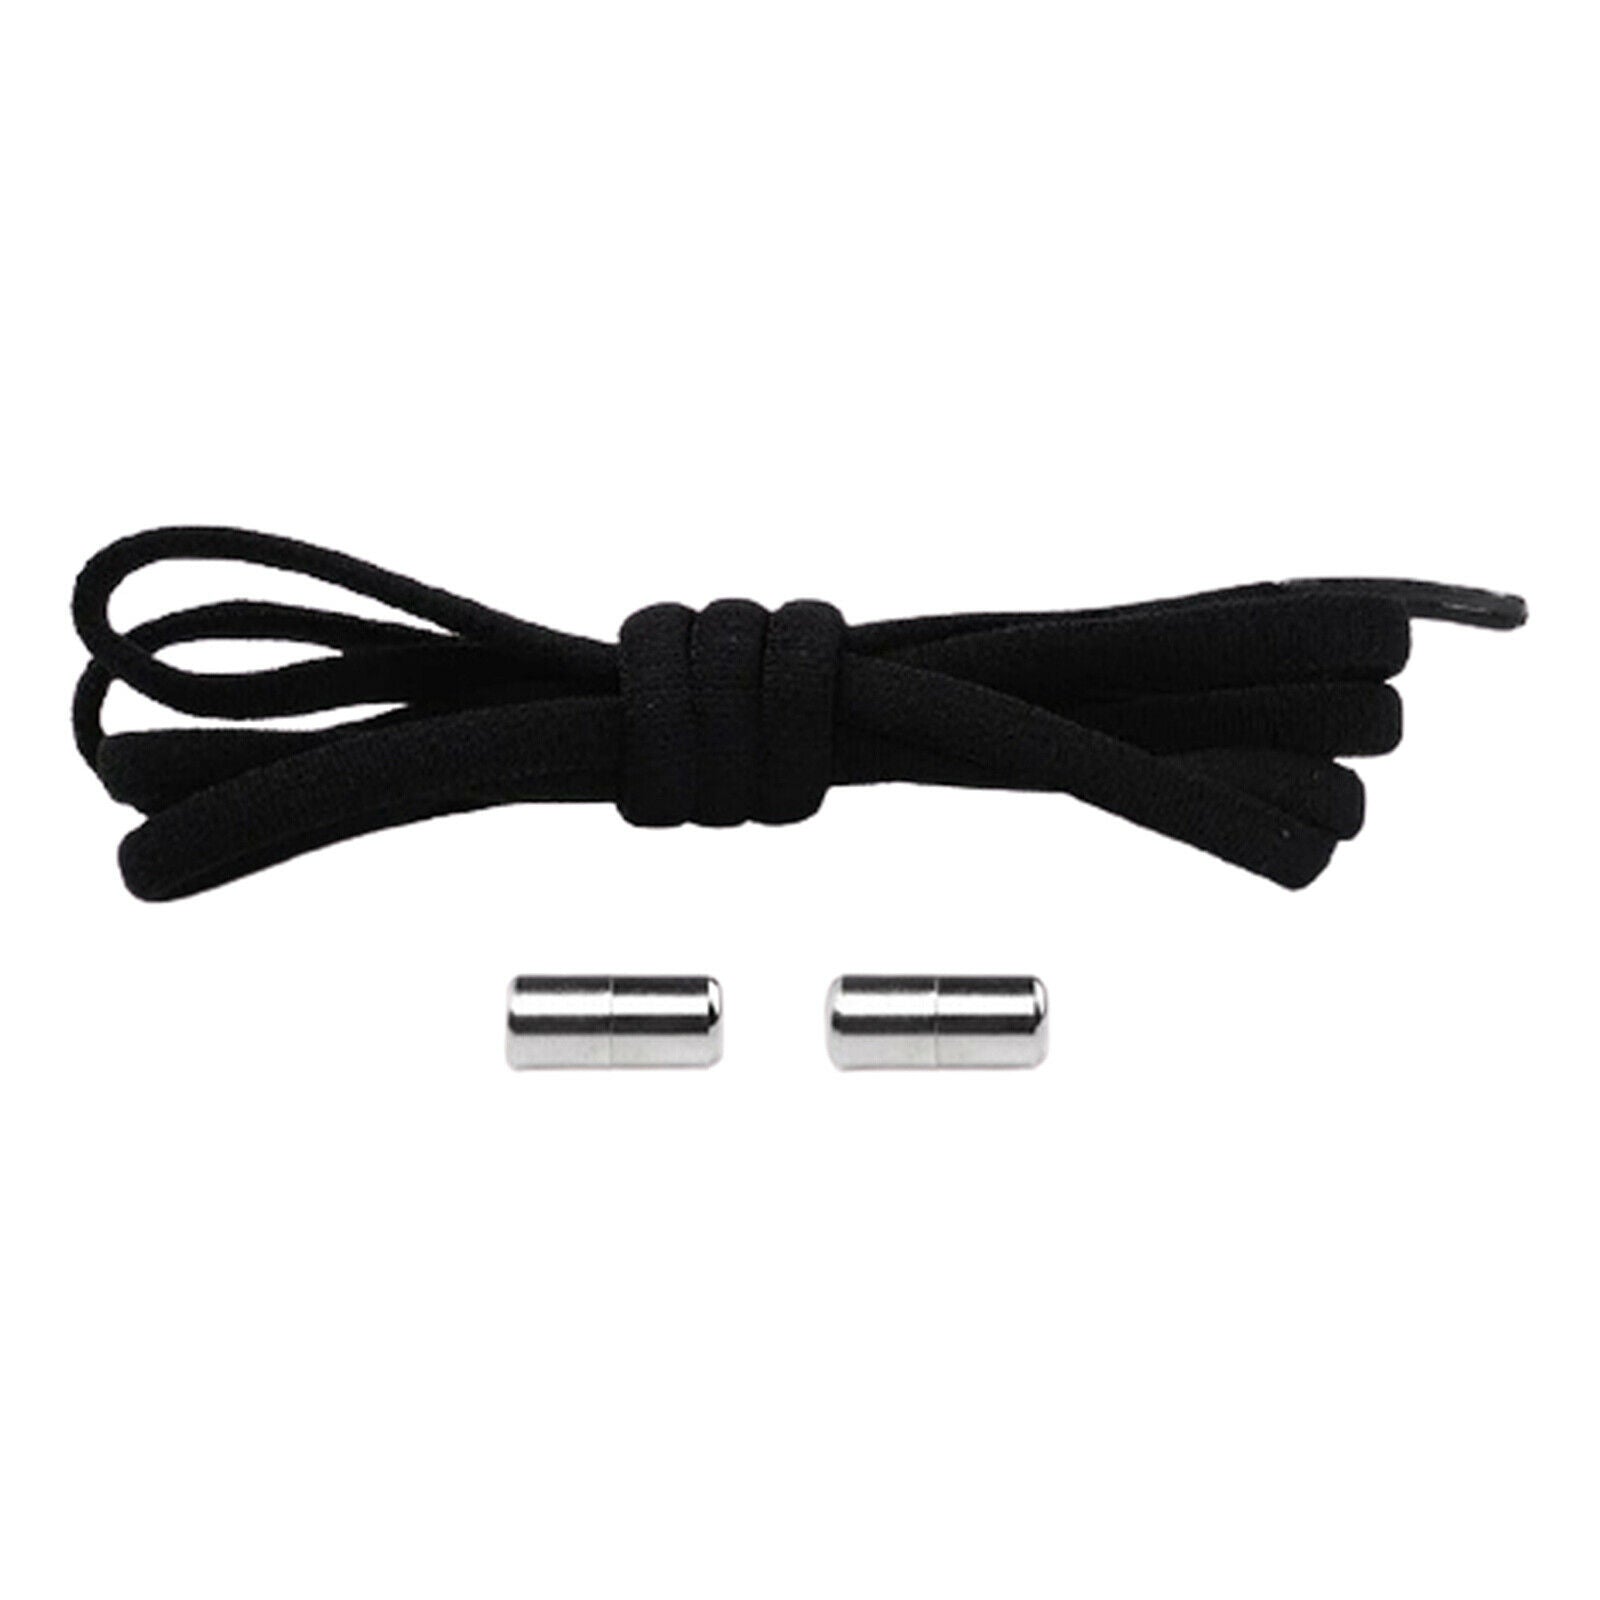 No Tie Shoelaces for Adults, Elastic Sports Running Shoelaces - Black